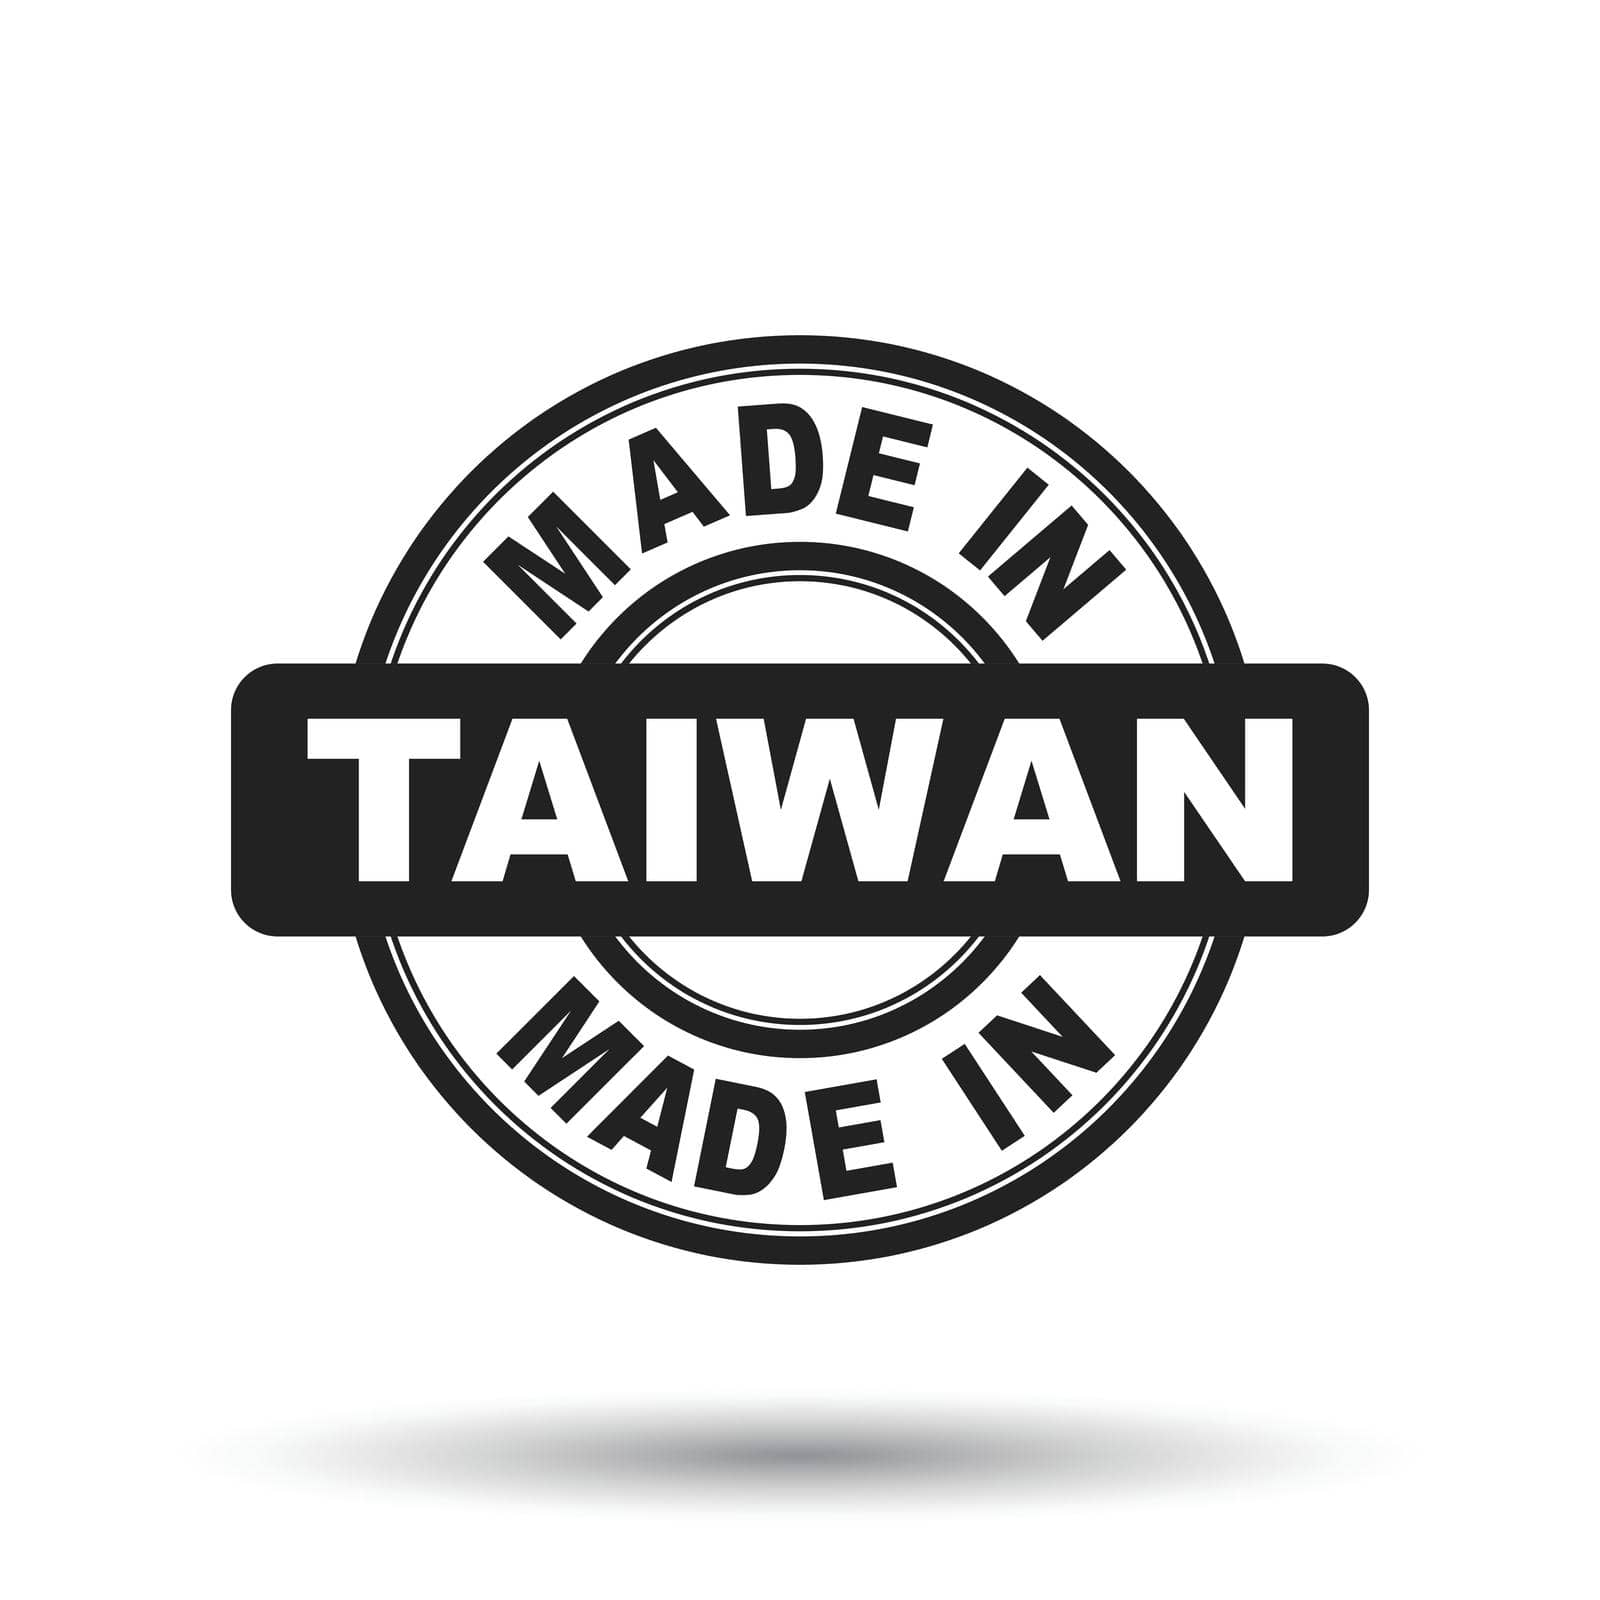 Made in Taiwan black stamp. Vector illustration on white background by LysenkoA